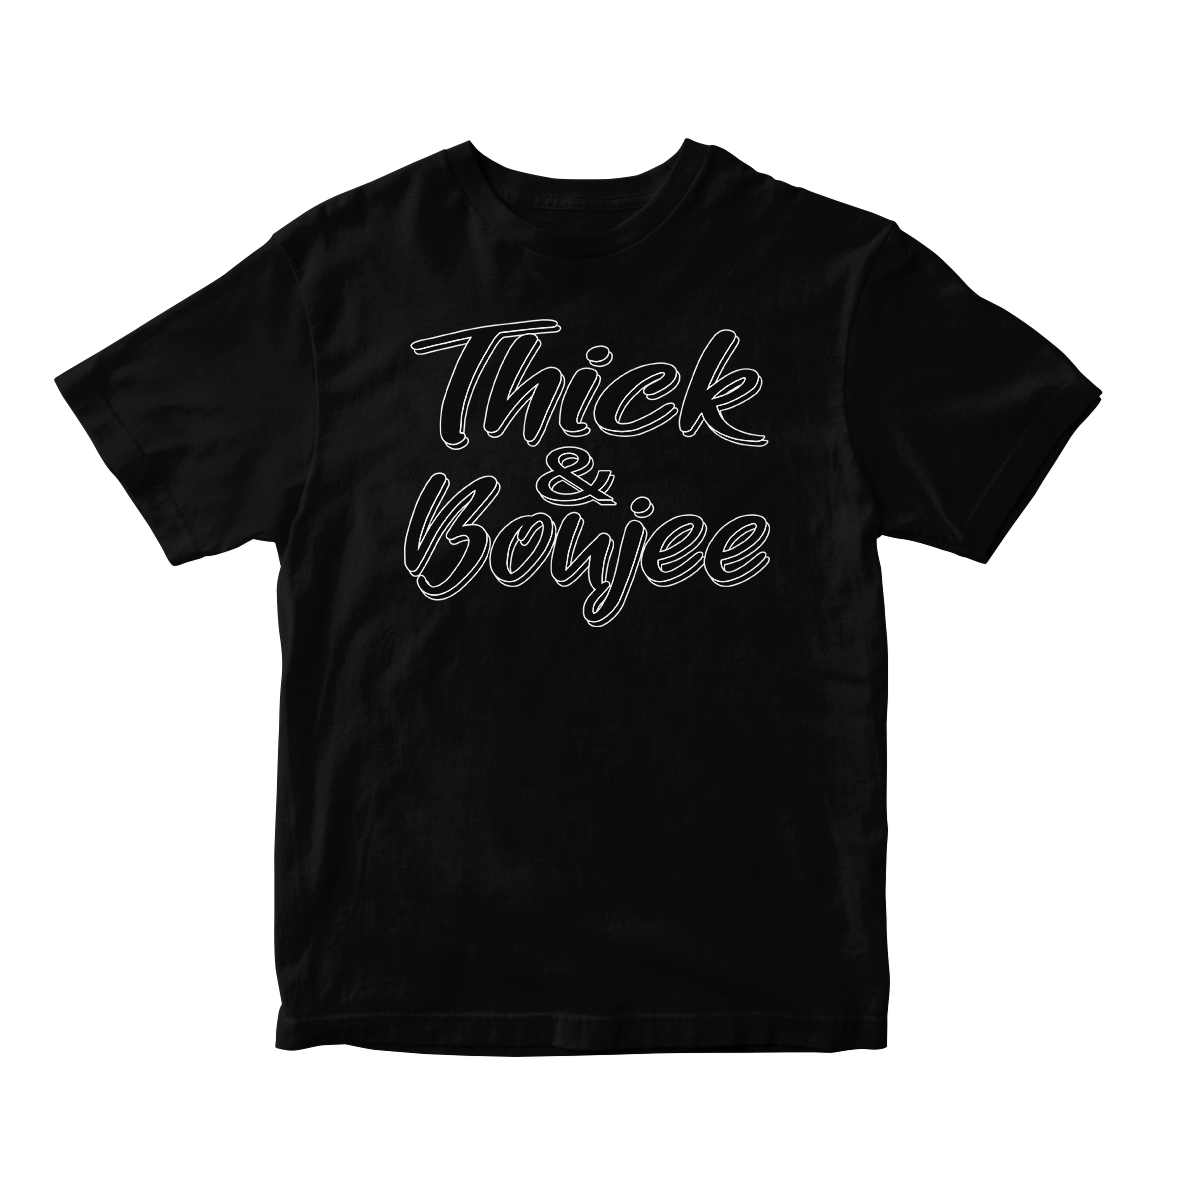 Thick & Boujee in B&W  Short Sleeve Tee